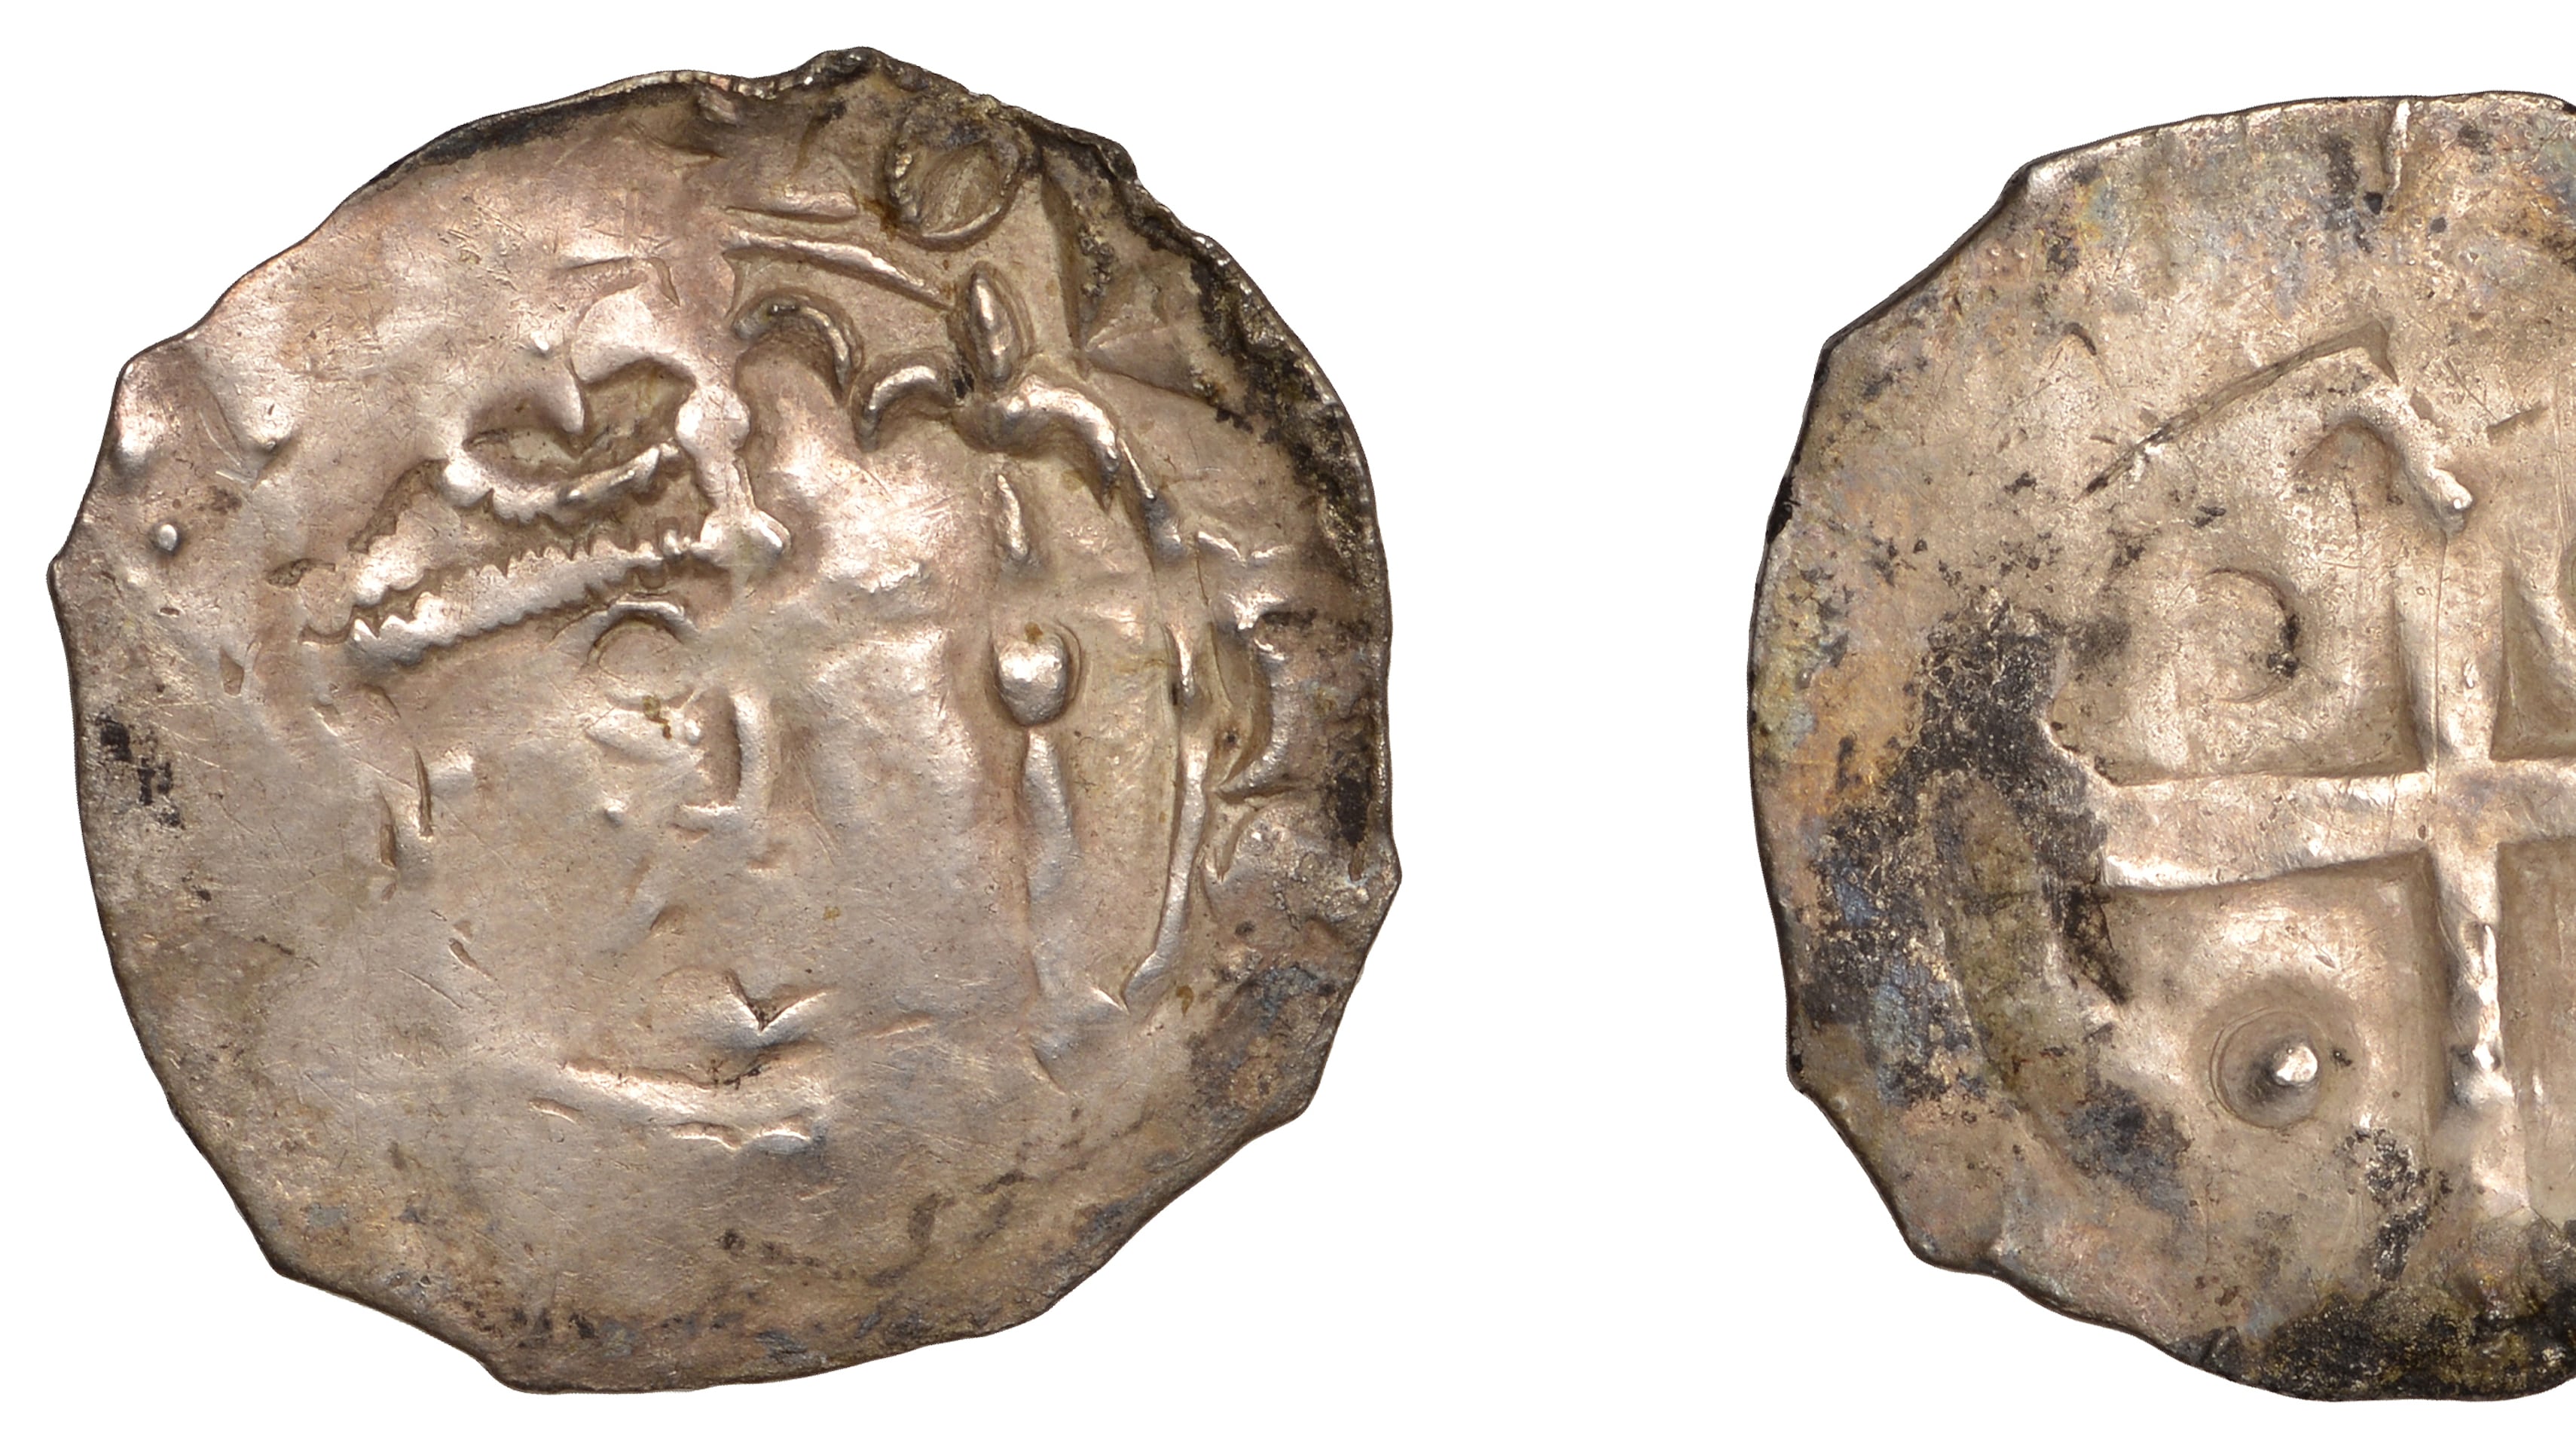 The very rare coin is believed to be one of the first ever struck in Scotland